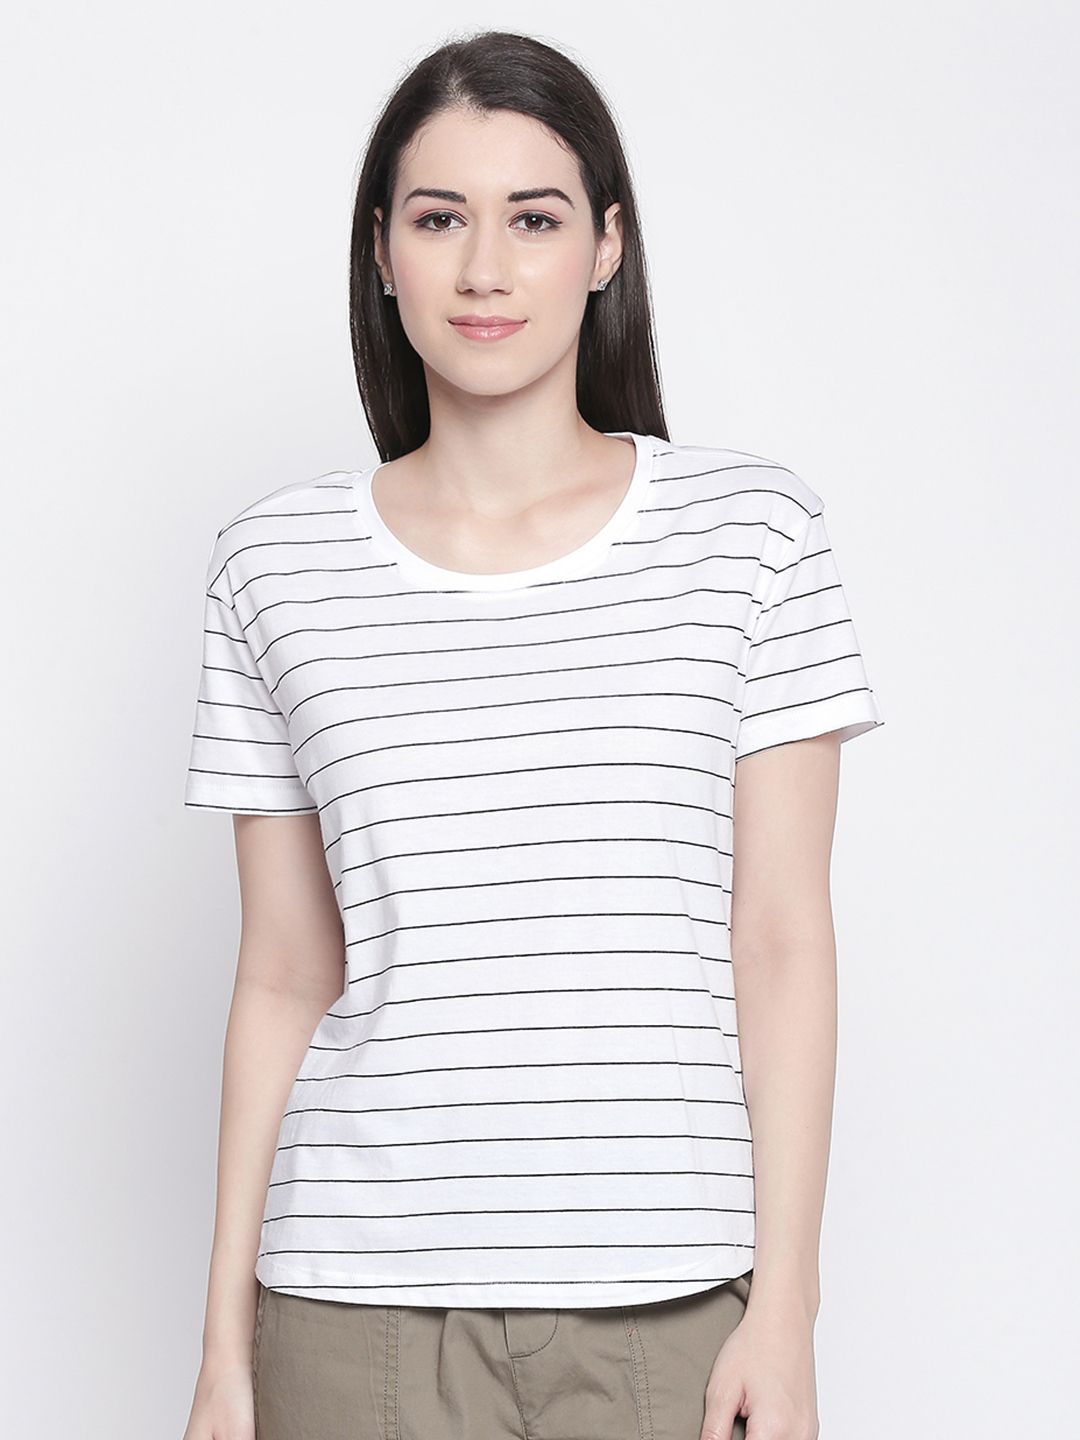 Dreamz by Pantaloons Women White Striped Lounge tshirt Price in India